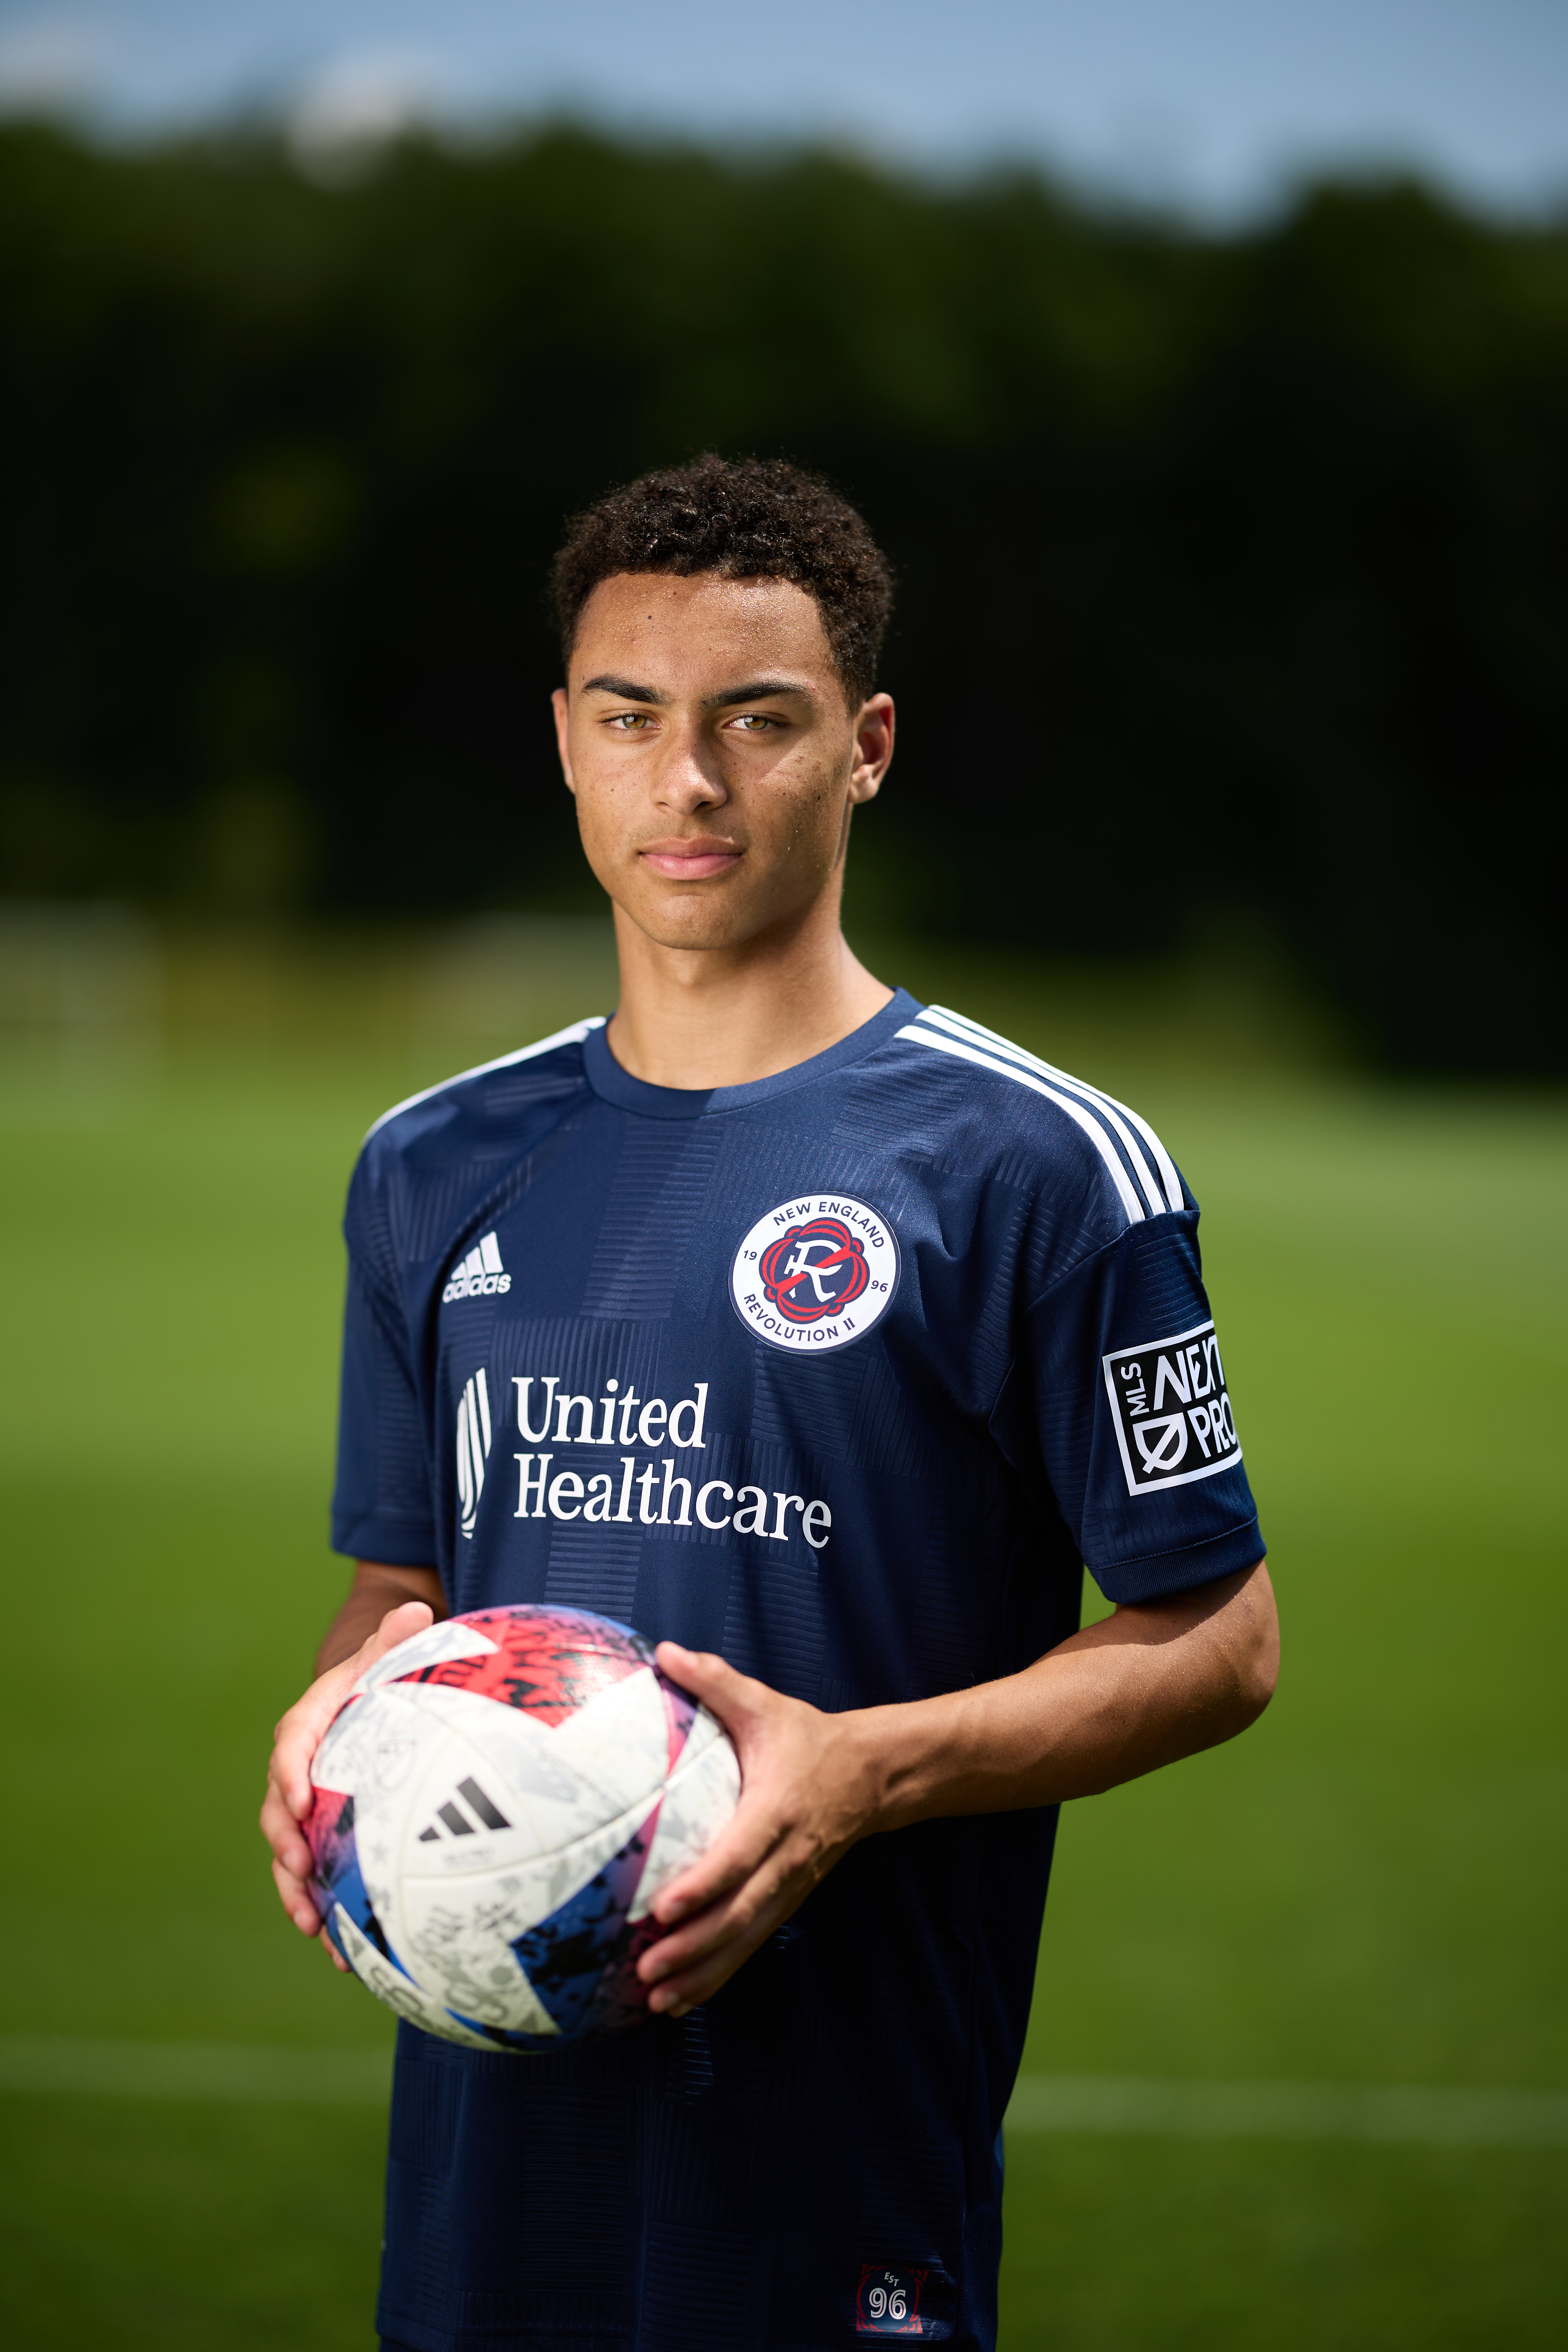 15-year-old soccer star youngest ever signed by New England Revolution